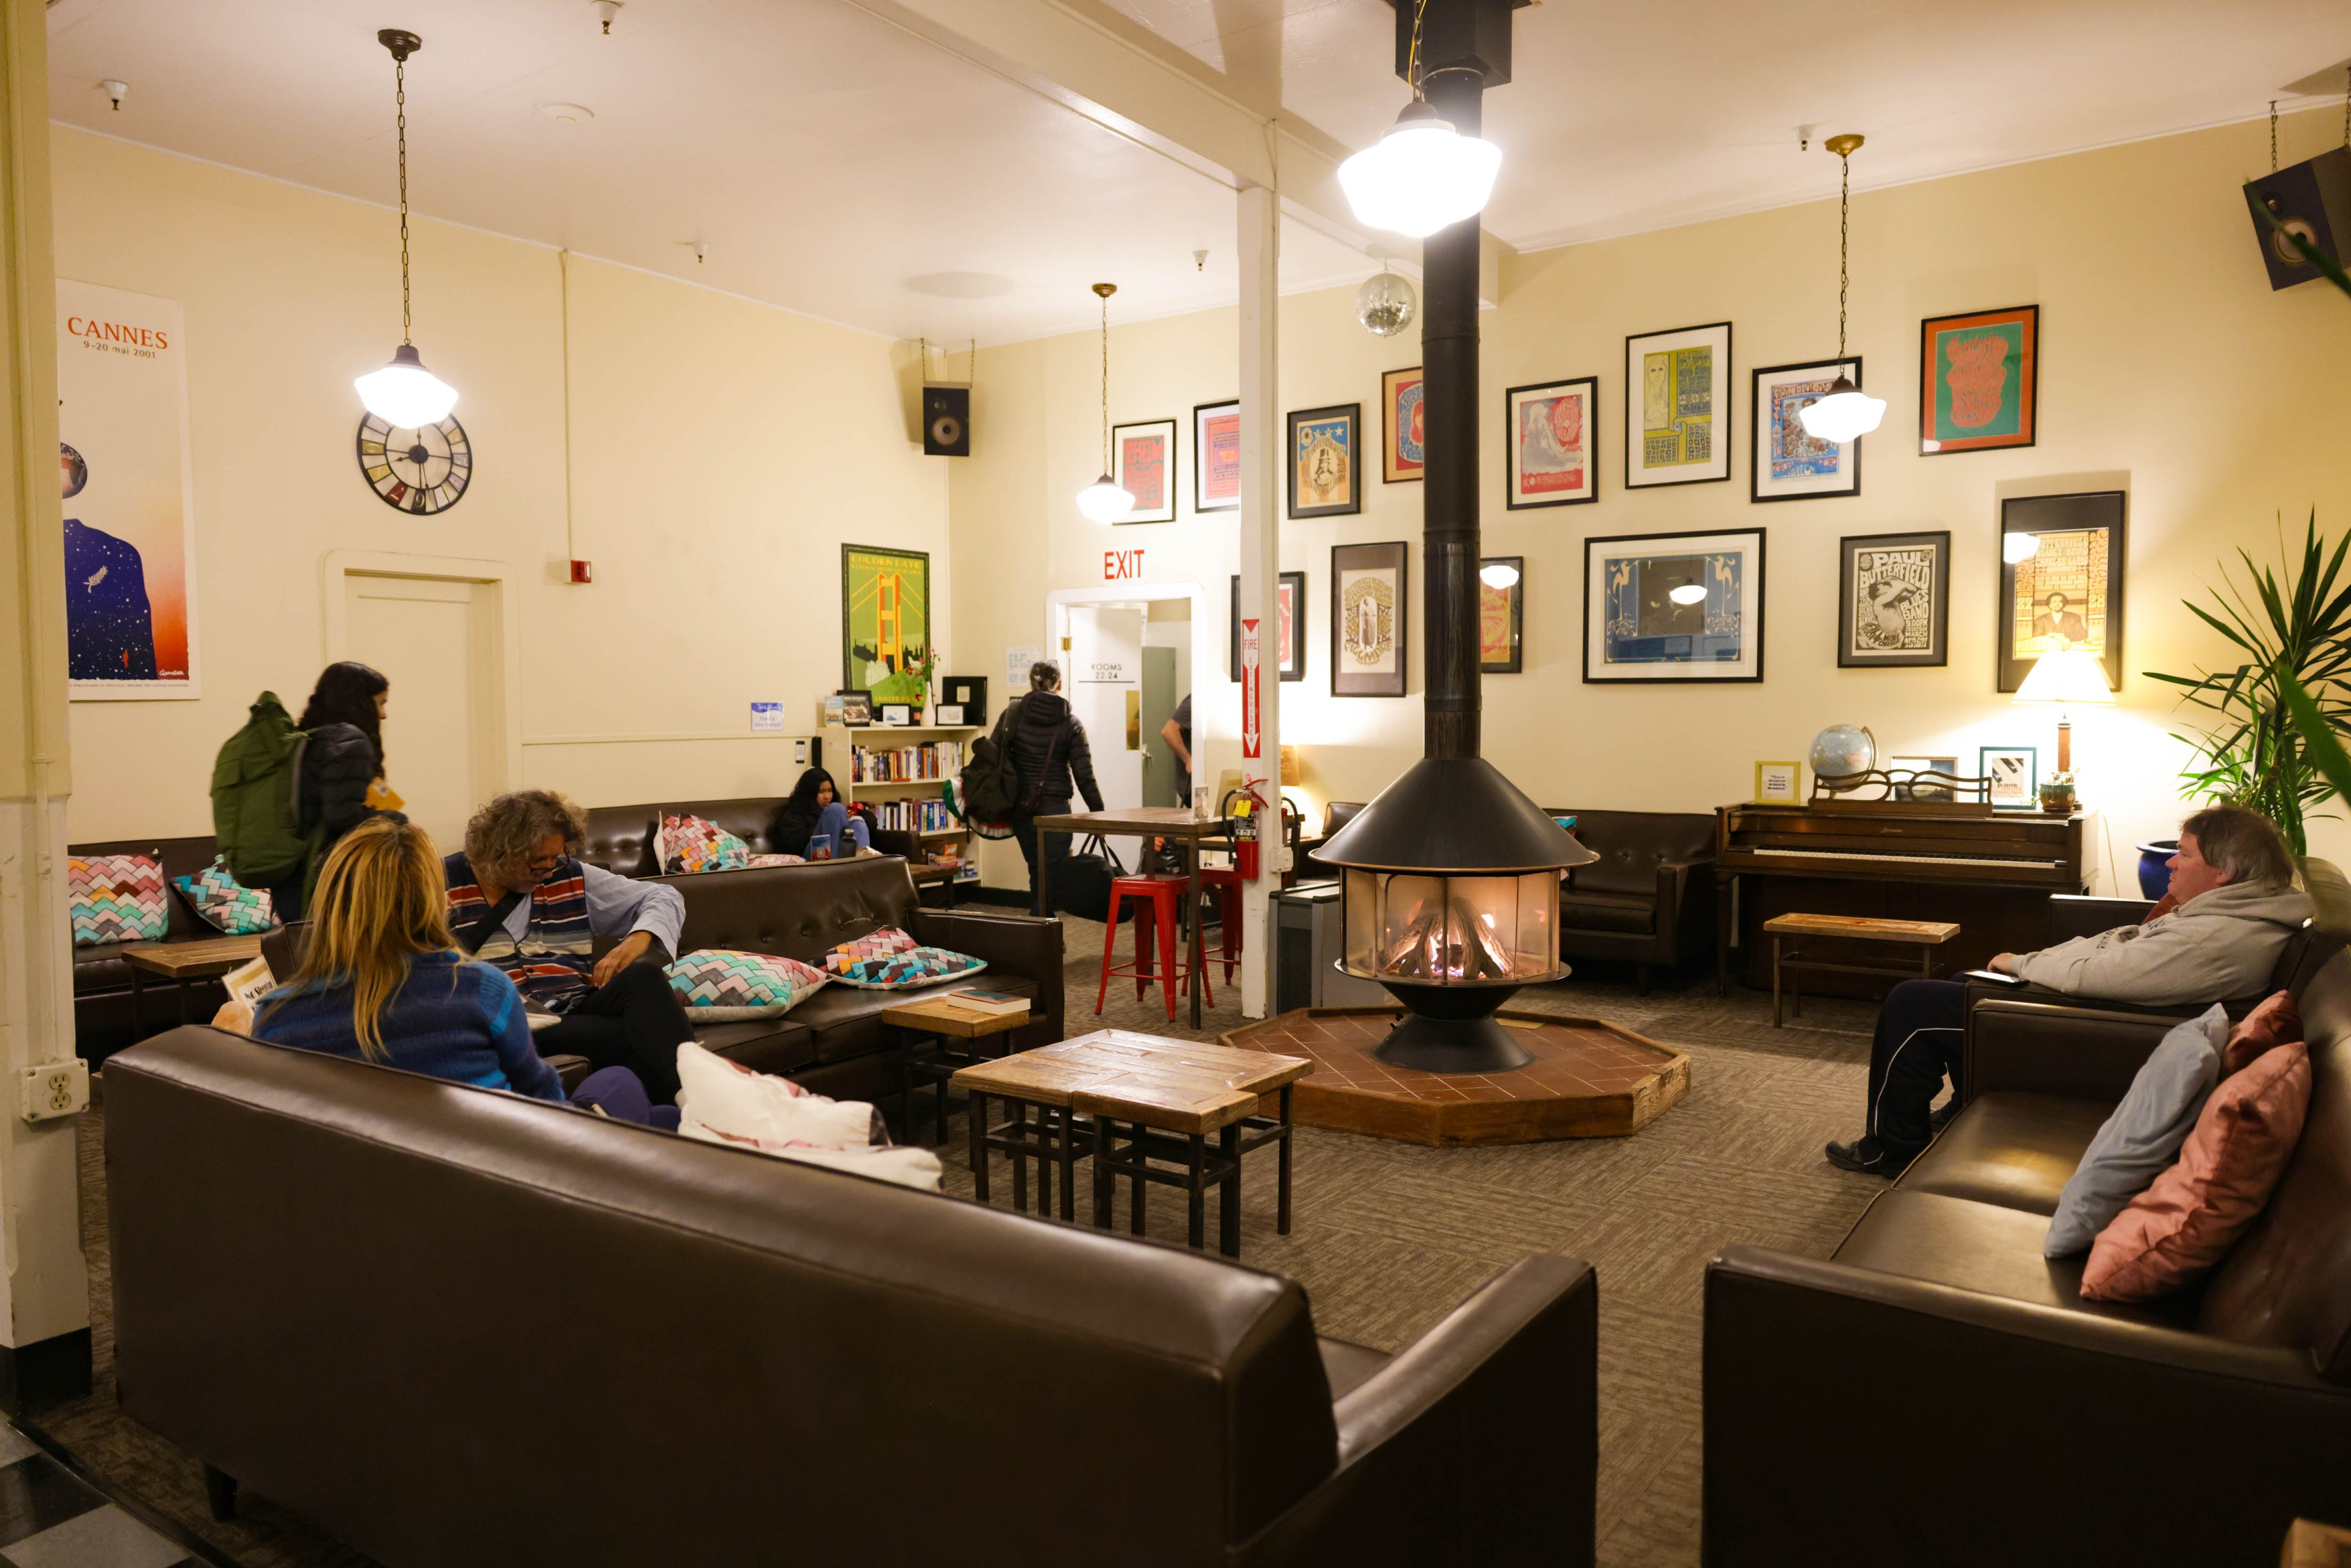 People around a fire place in the lobby of a hostel. 